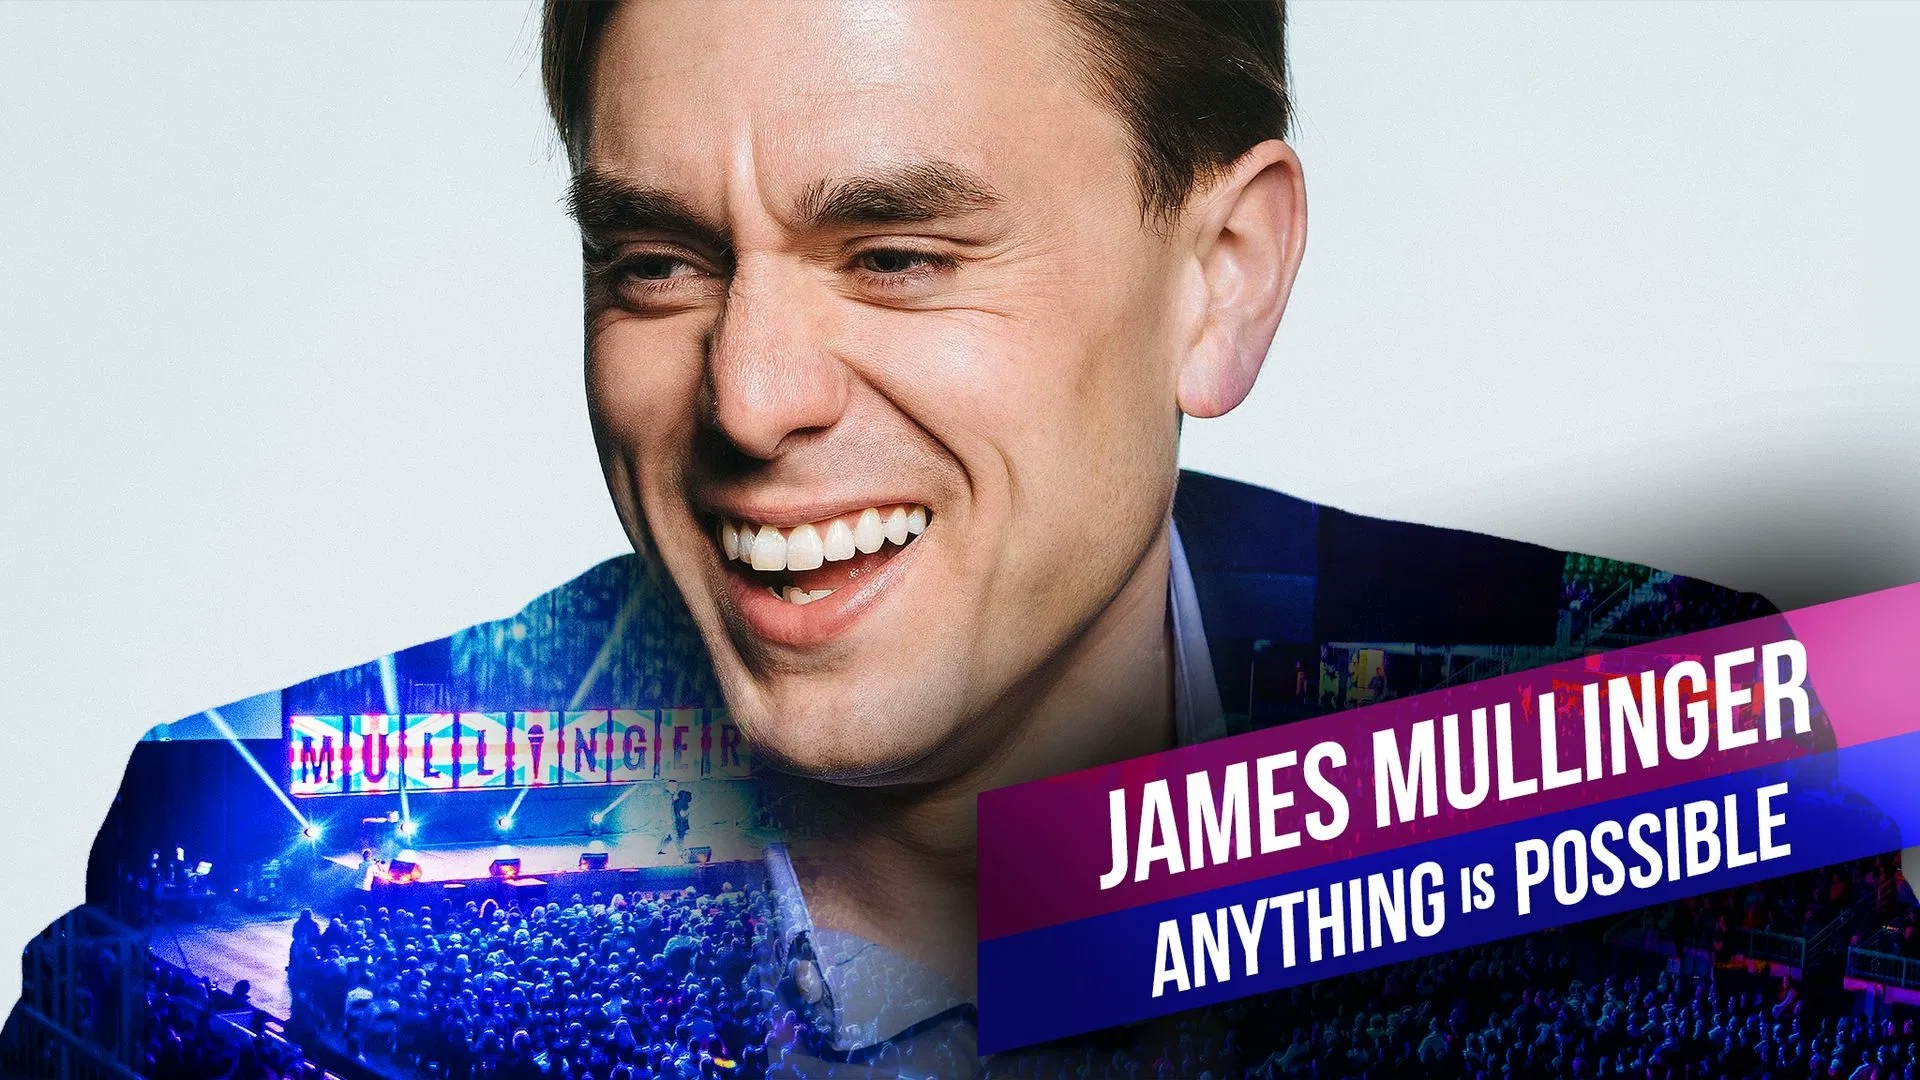 James Mullinger: Anything is Possible